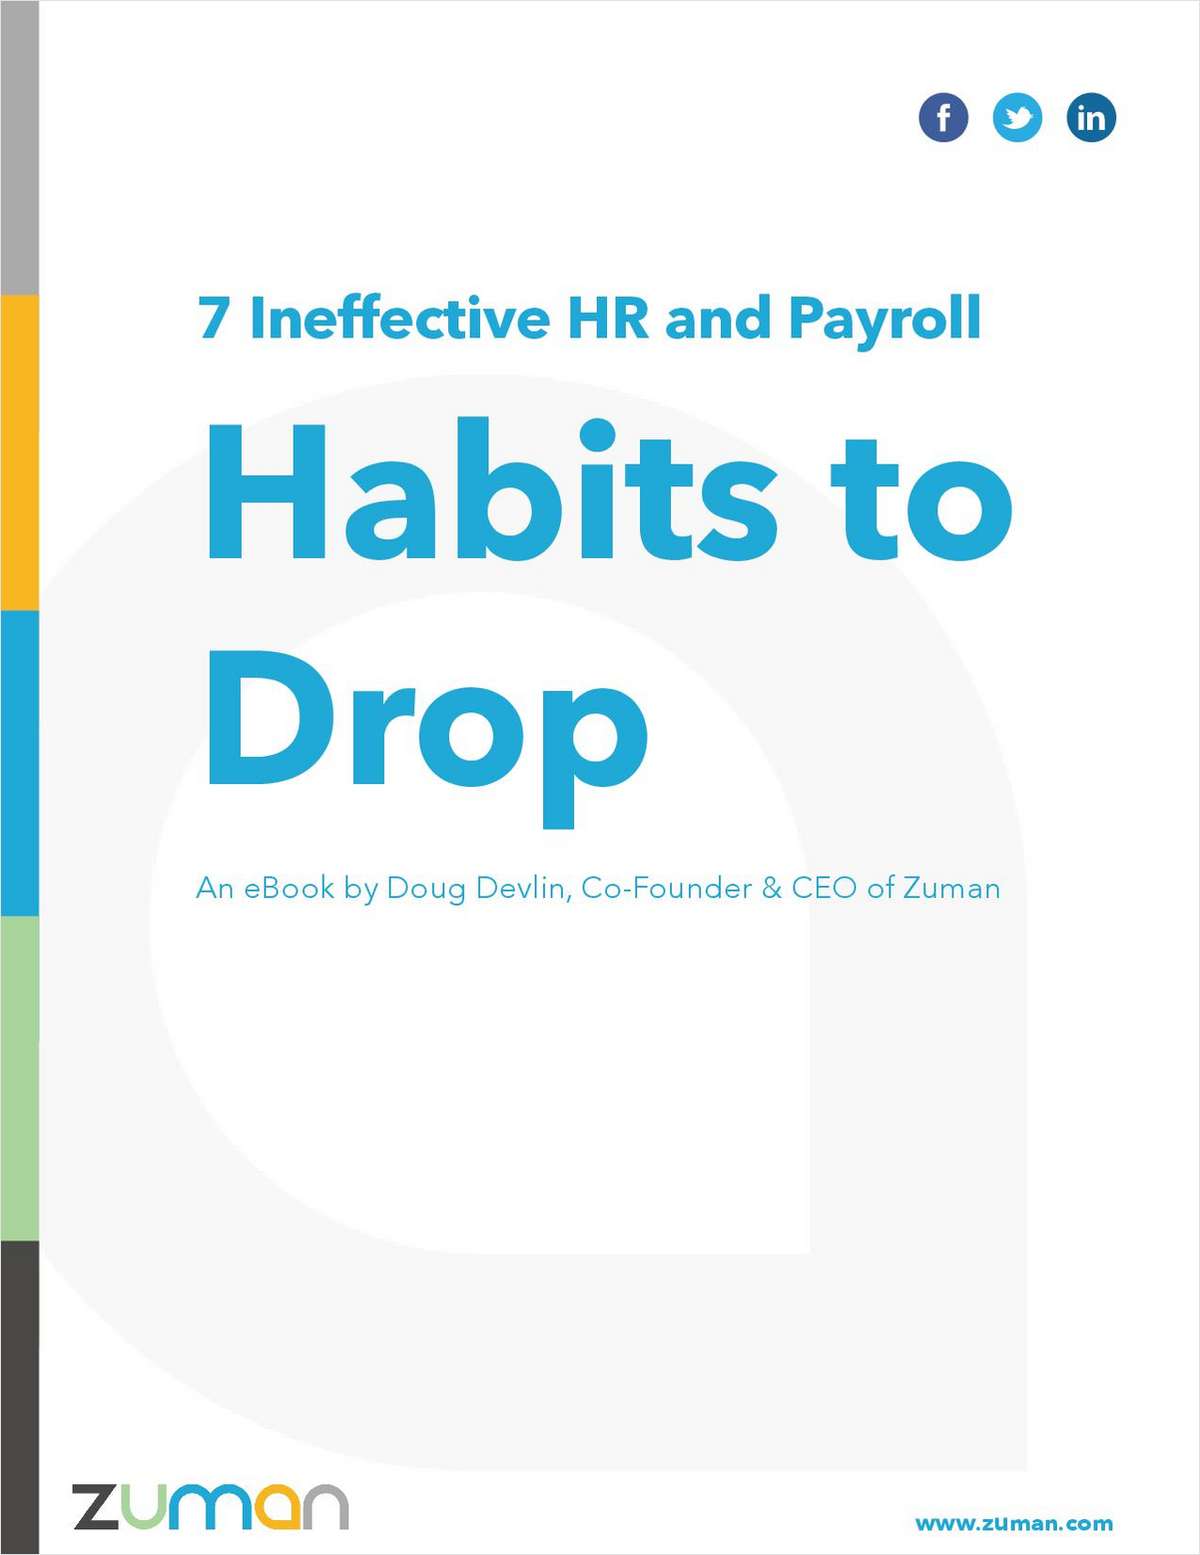 7 Ineffective HR and Payroll Habits to Drop